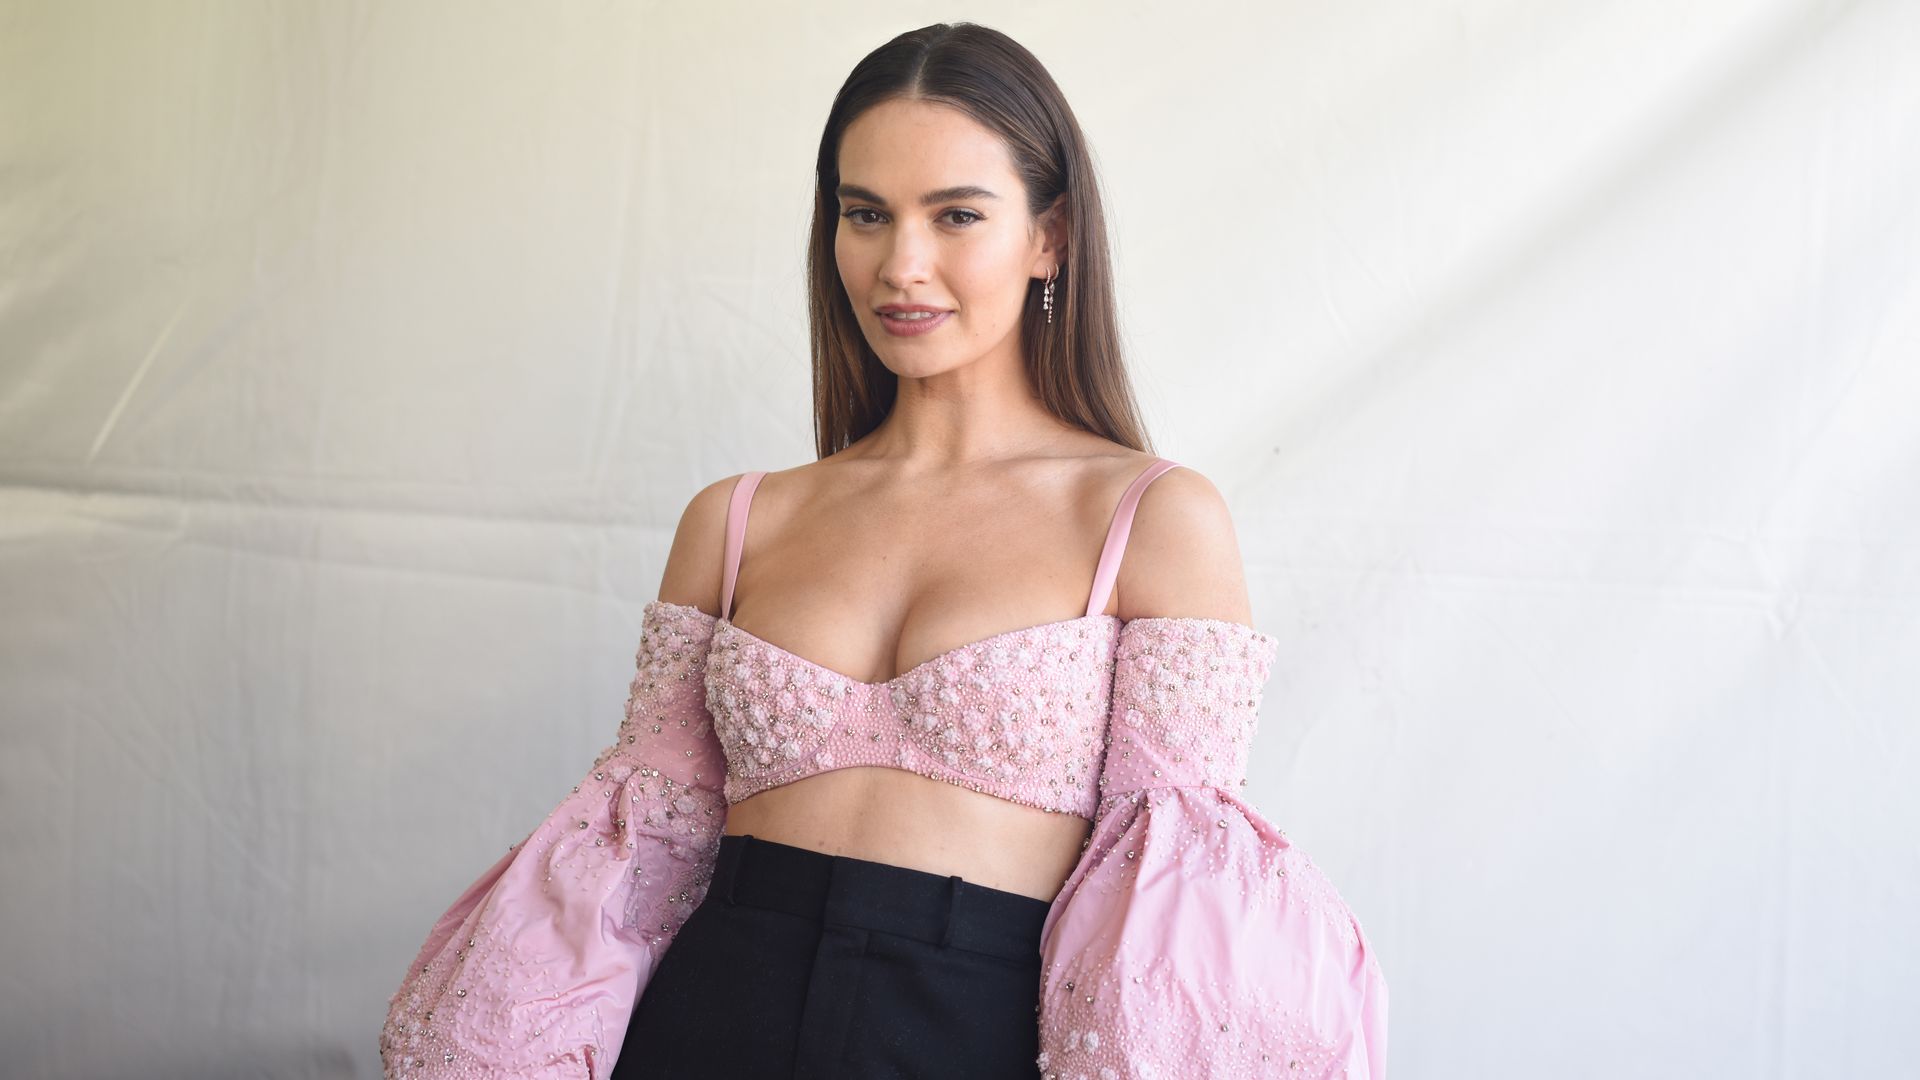 SANTA MONICA, CALIFORNIA - MARCH 06: Lily James attends the 2022 Film Independent Spirit Awards on March 06, 2022 in Santa Monica, California. (Photo by Araya Doheny/Getty Images)